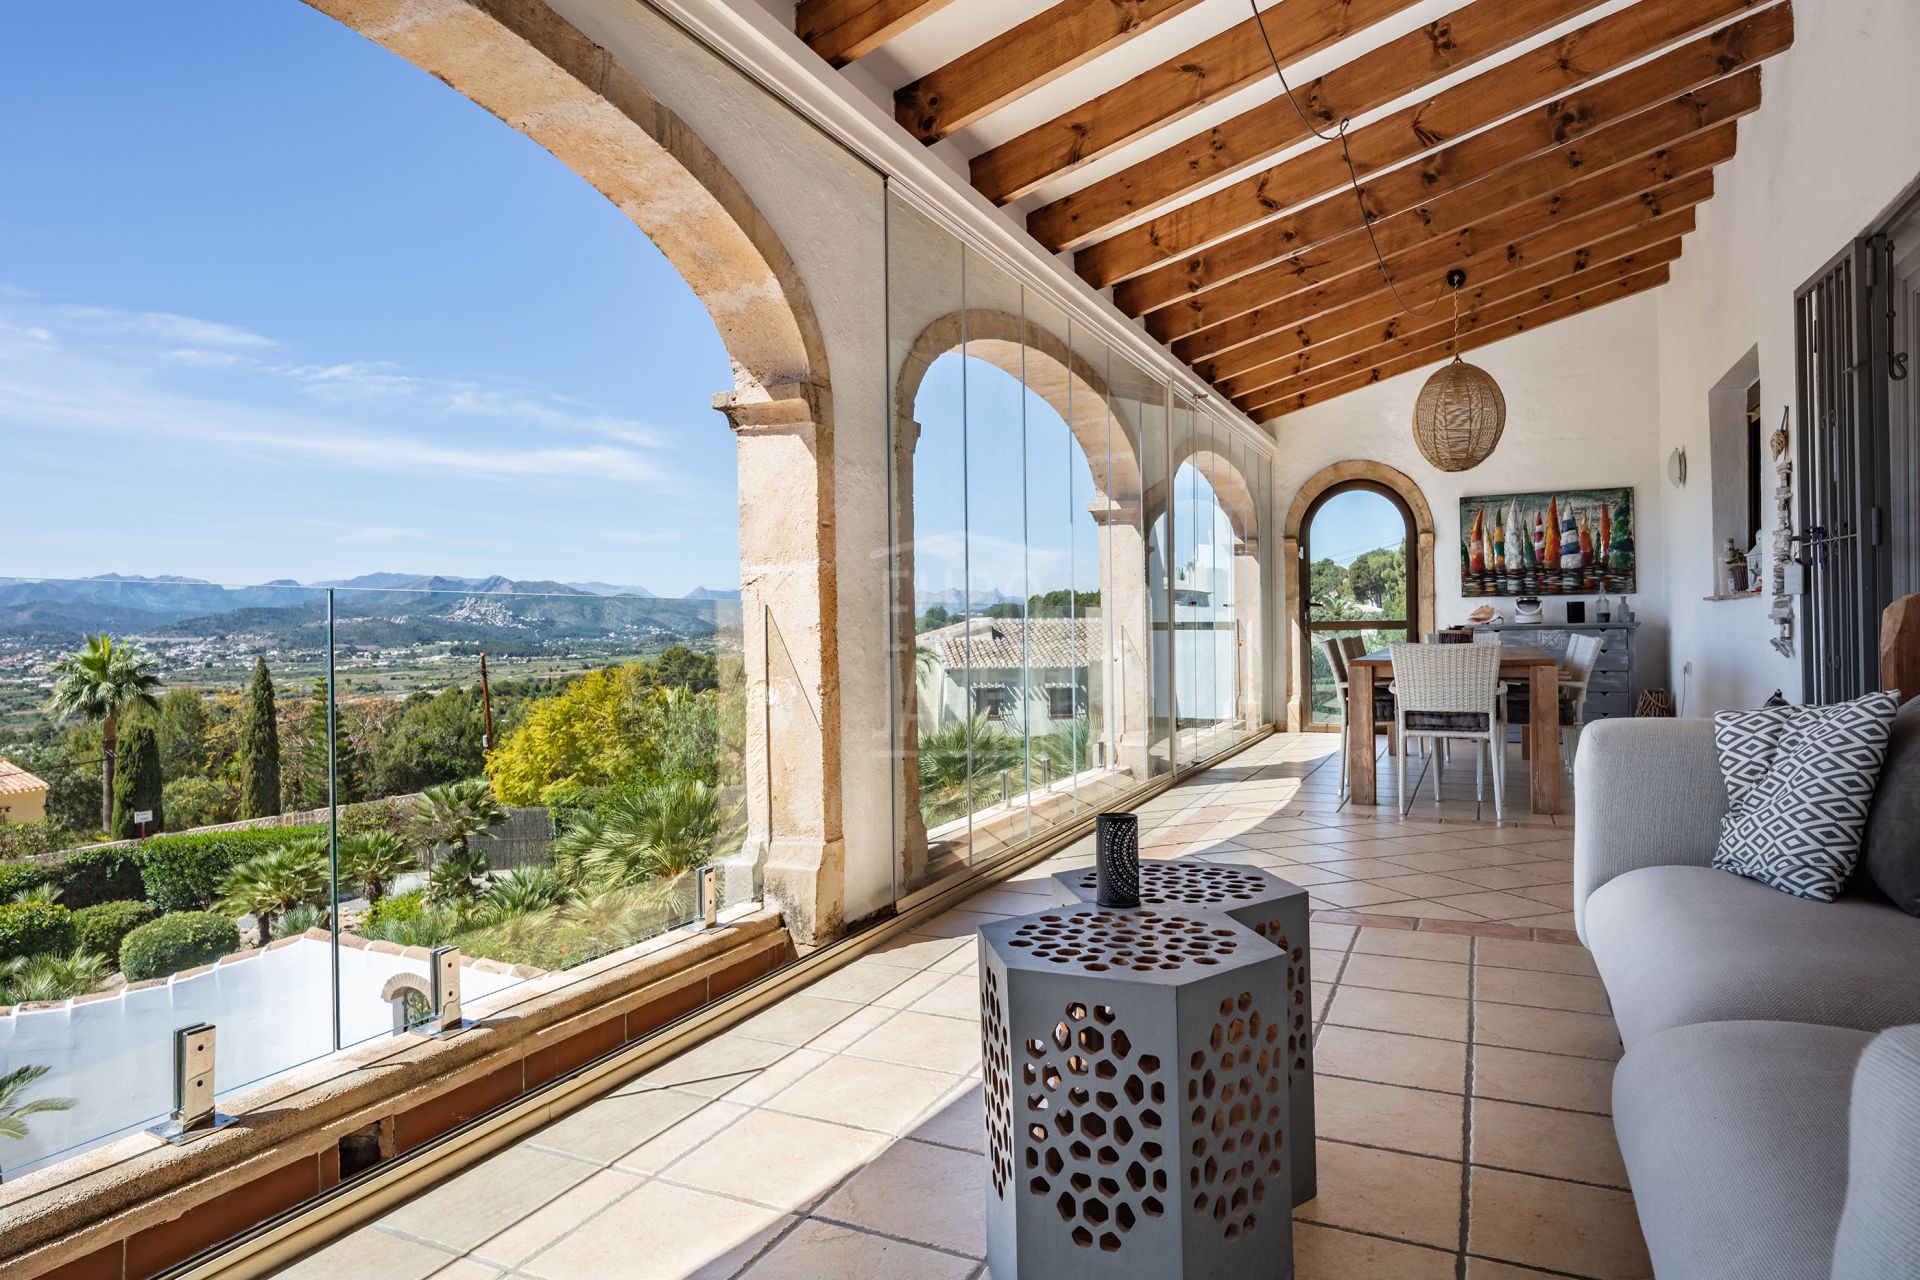 Villa for sale exclusively in the Montgó area, with spectacular views of the valley